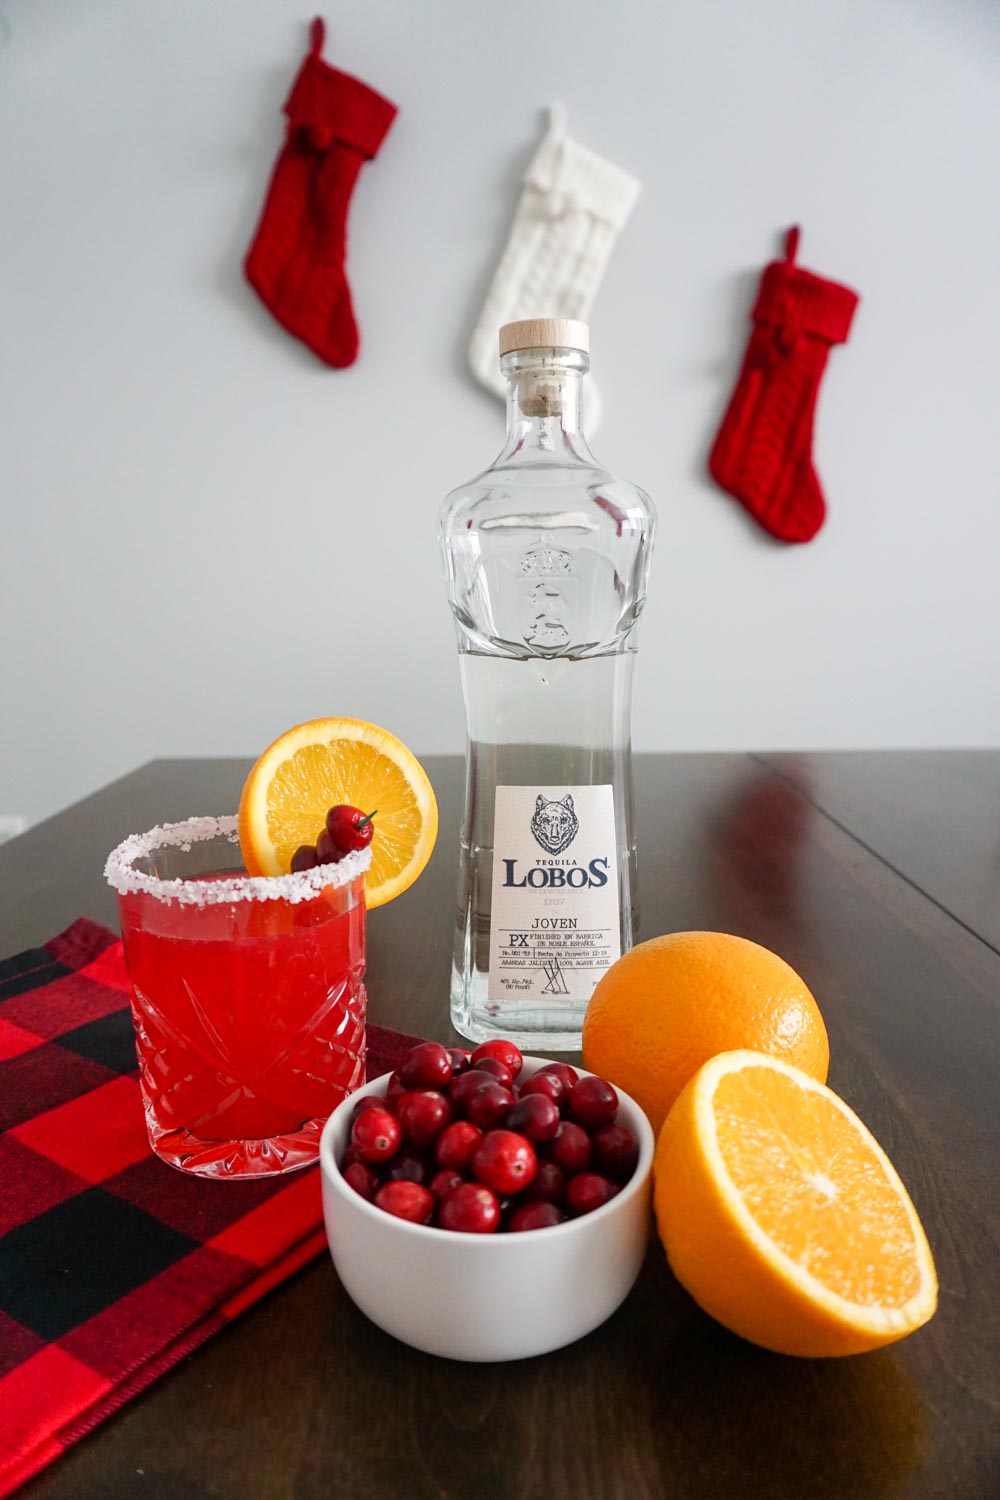 Lobos 1707 Tequila, Joven bottle sits on a dark wooden table with small white bowl of fresh cranberries, halved navel orange, and a cranberry orange margarita in a double old fashioned cocktail glass with a salted rim and fresh cranberry and orange slice garnish in festive holiday setting with red buffalo check cloth and red and white cable knit stockings hanging in background